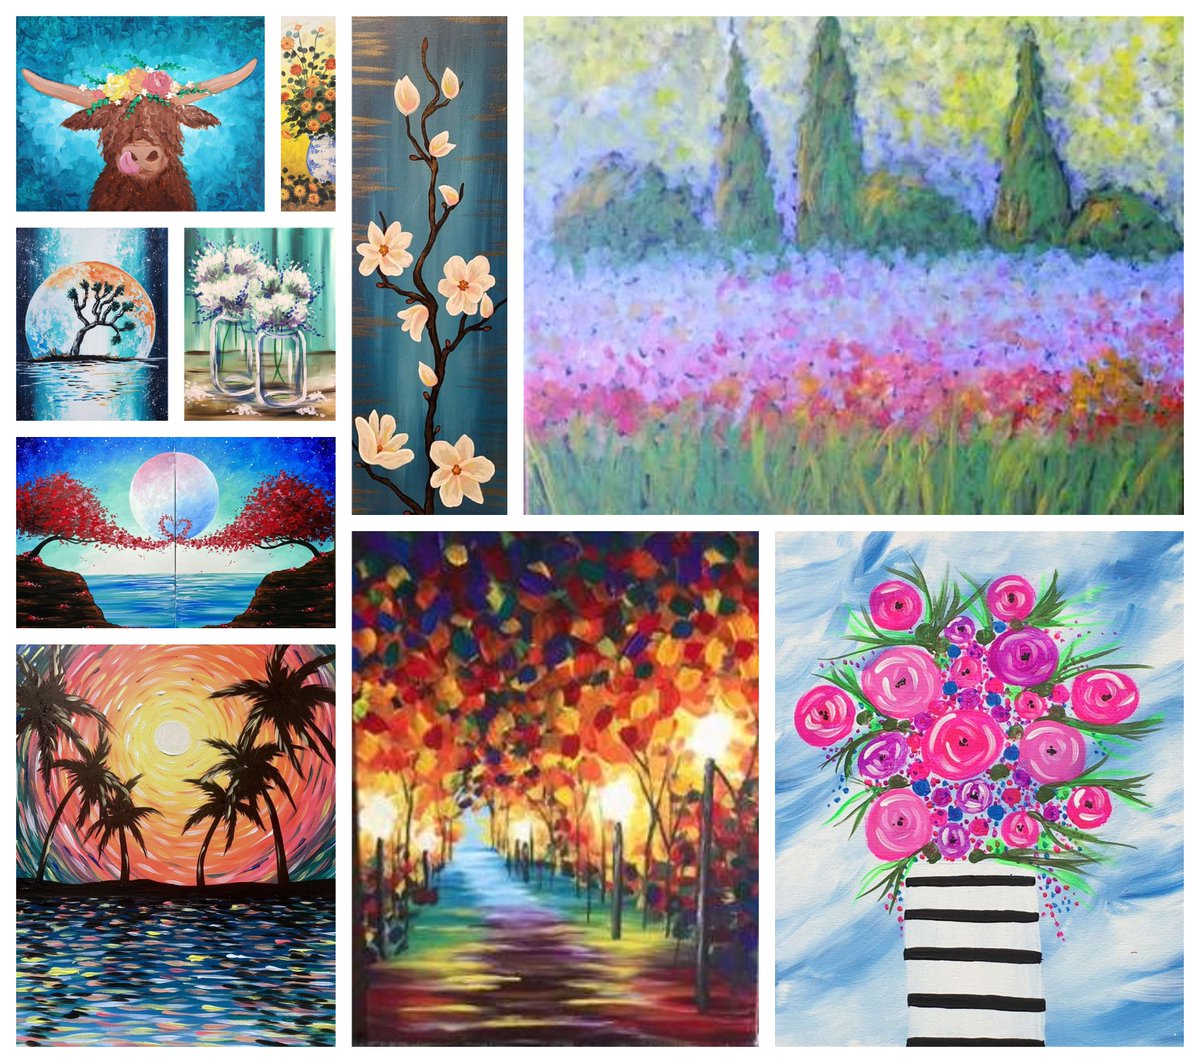 Indulge in Artistic Bliss with Pinot's Palette 📷📷
View all upcoming events here:
📷 pinotspalette.com/webstergroves/…
#paint #wine #stl #webstergroves #art #fun #girlsnightout #datenightideas